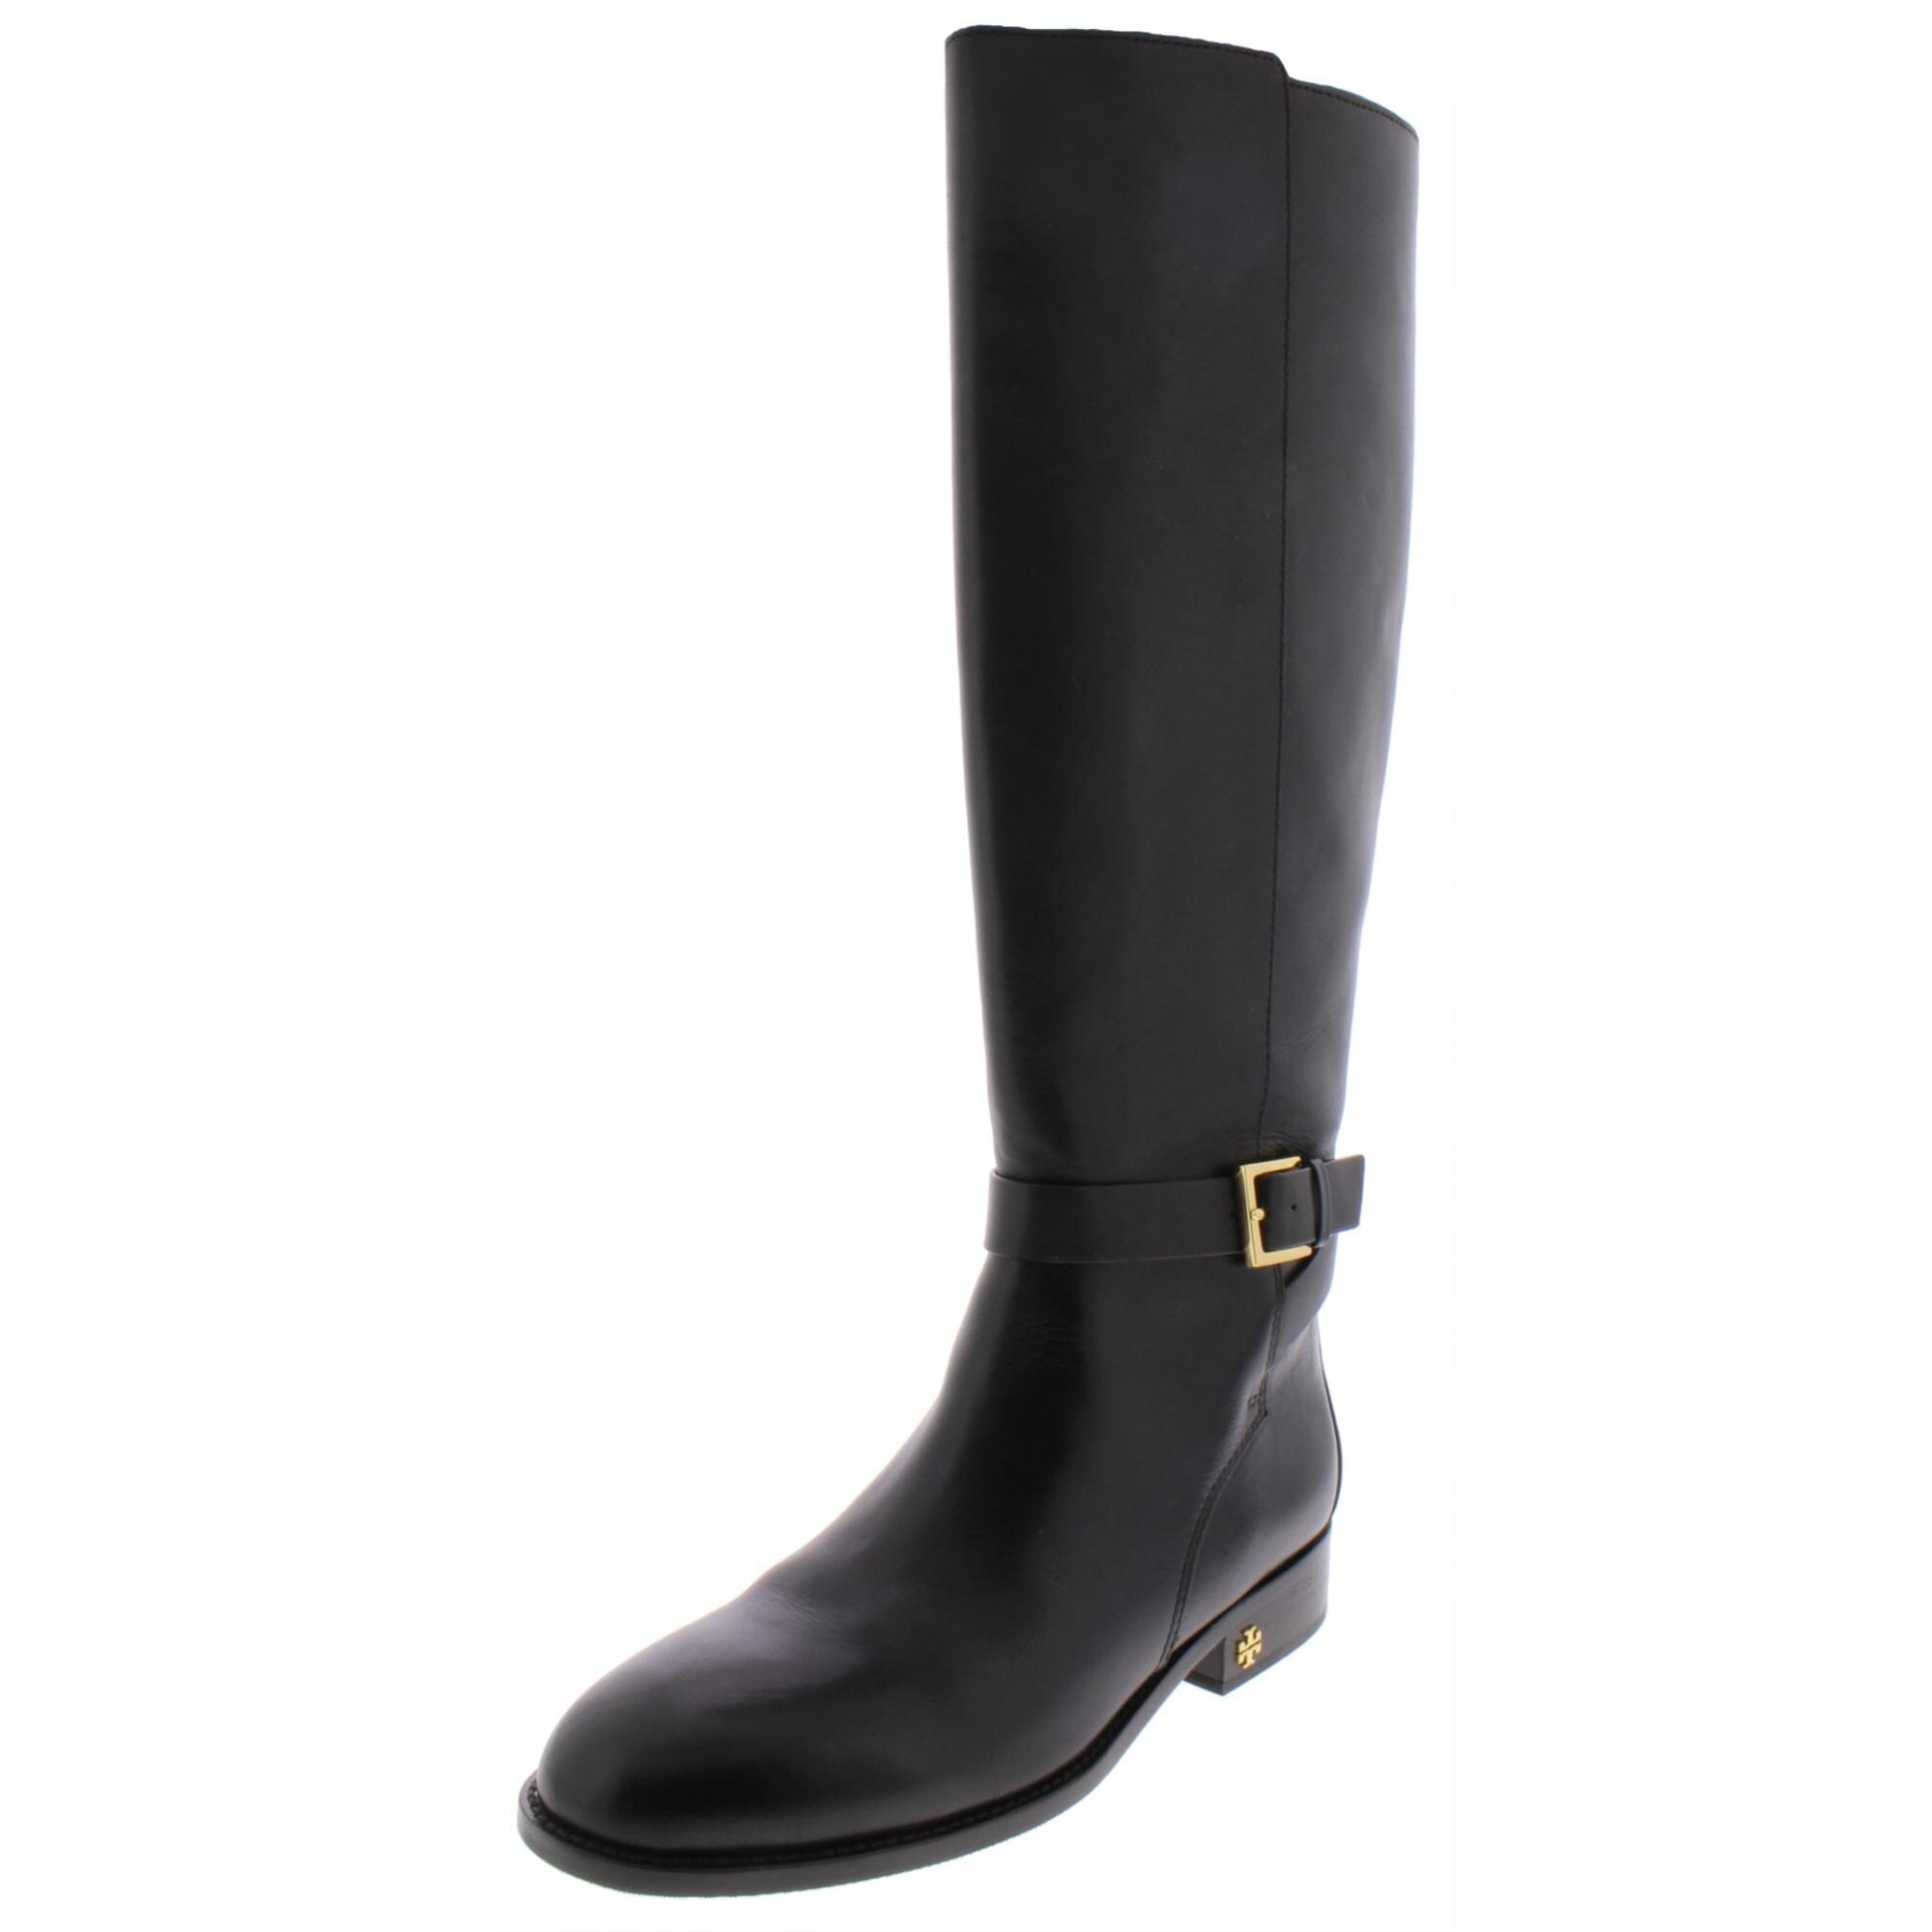 tory burch women's brooke round toe leather riding boots